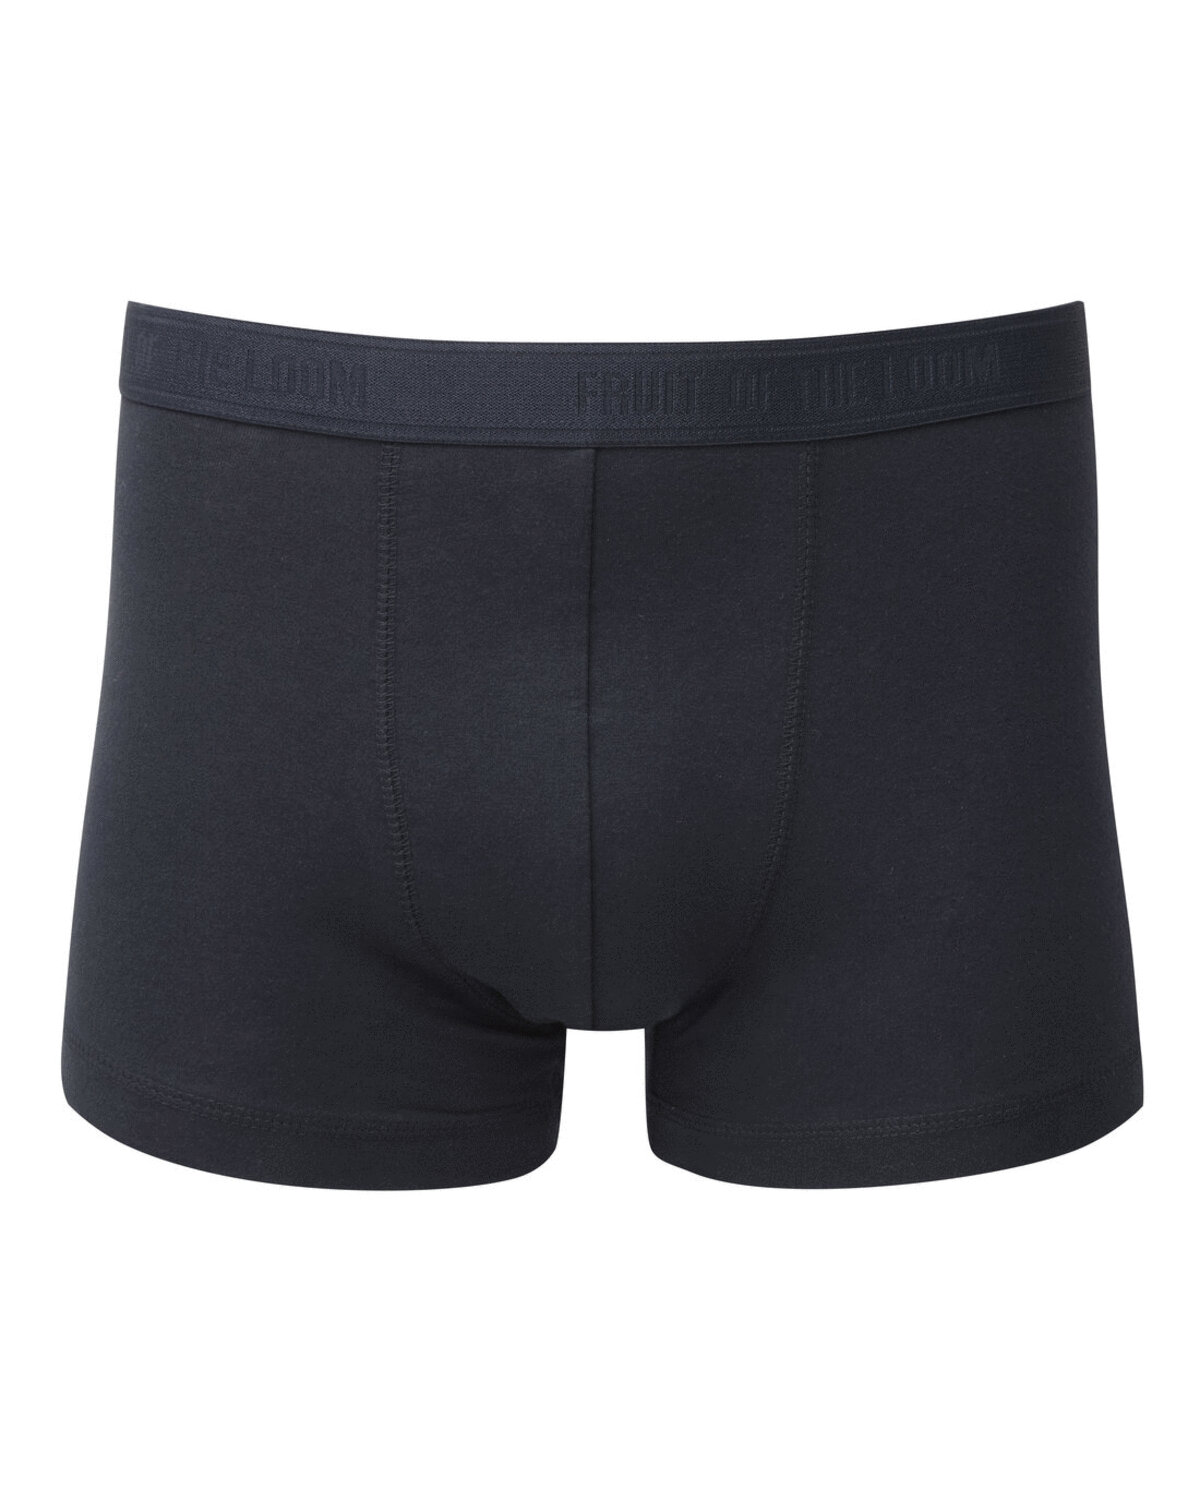 CLASSIC SHORTY BOXERS